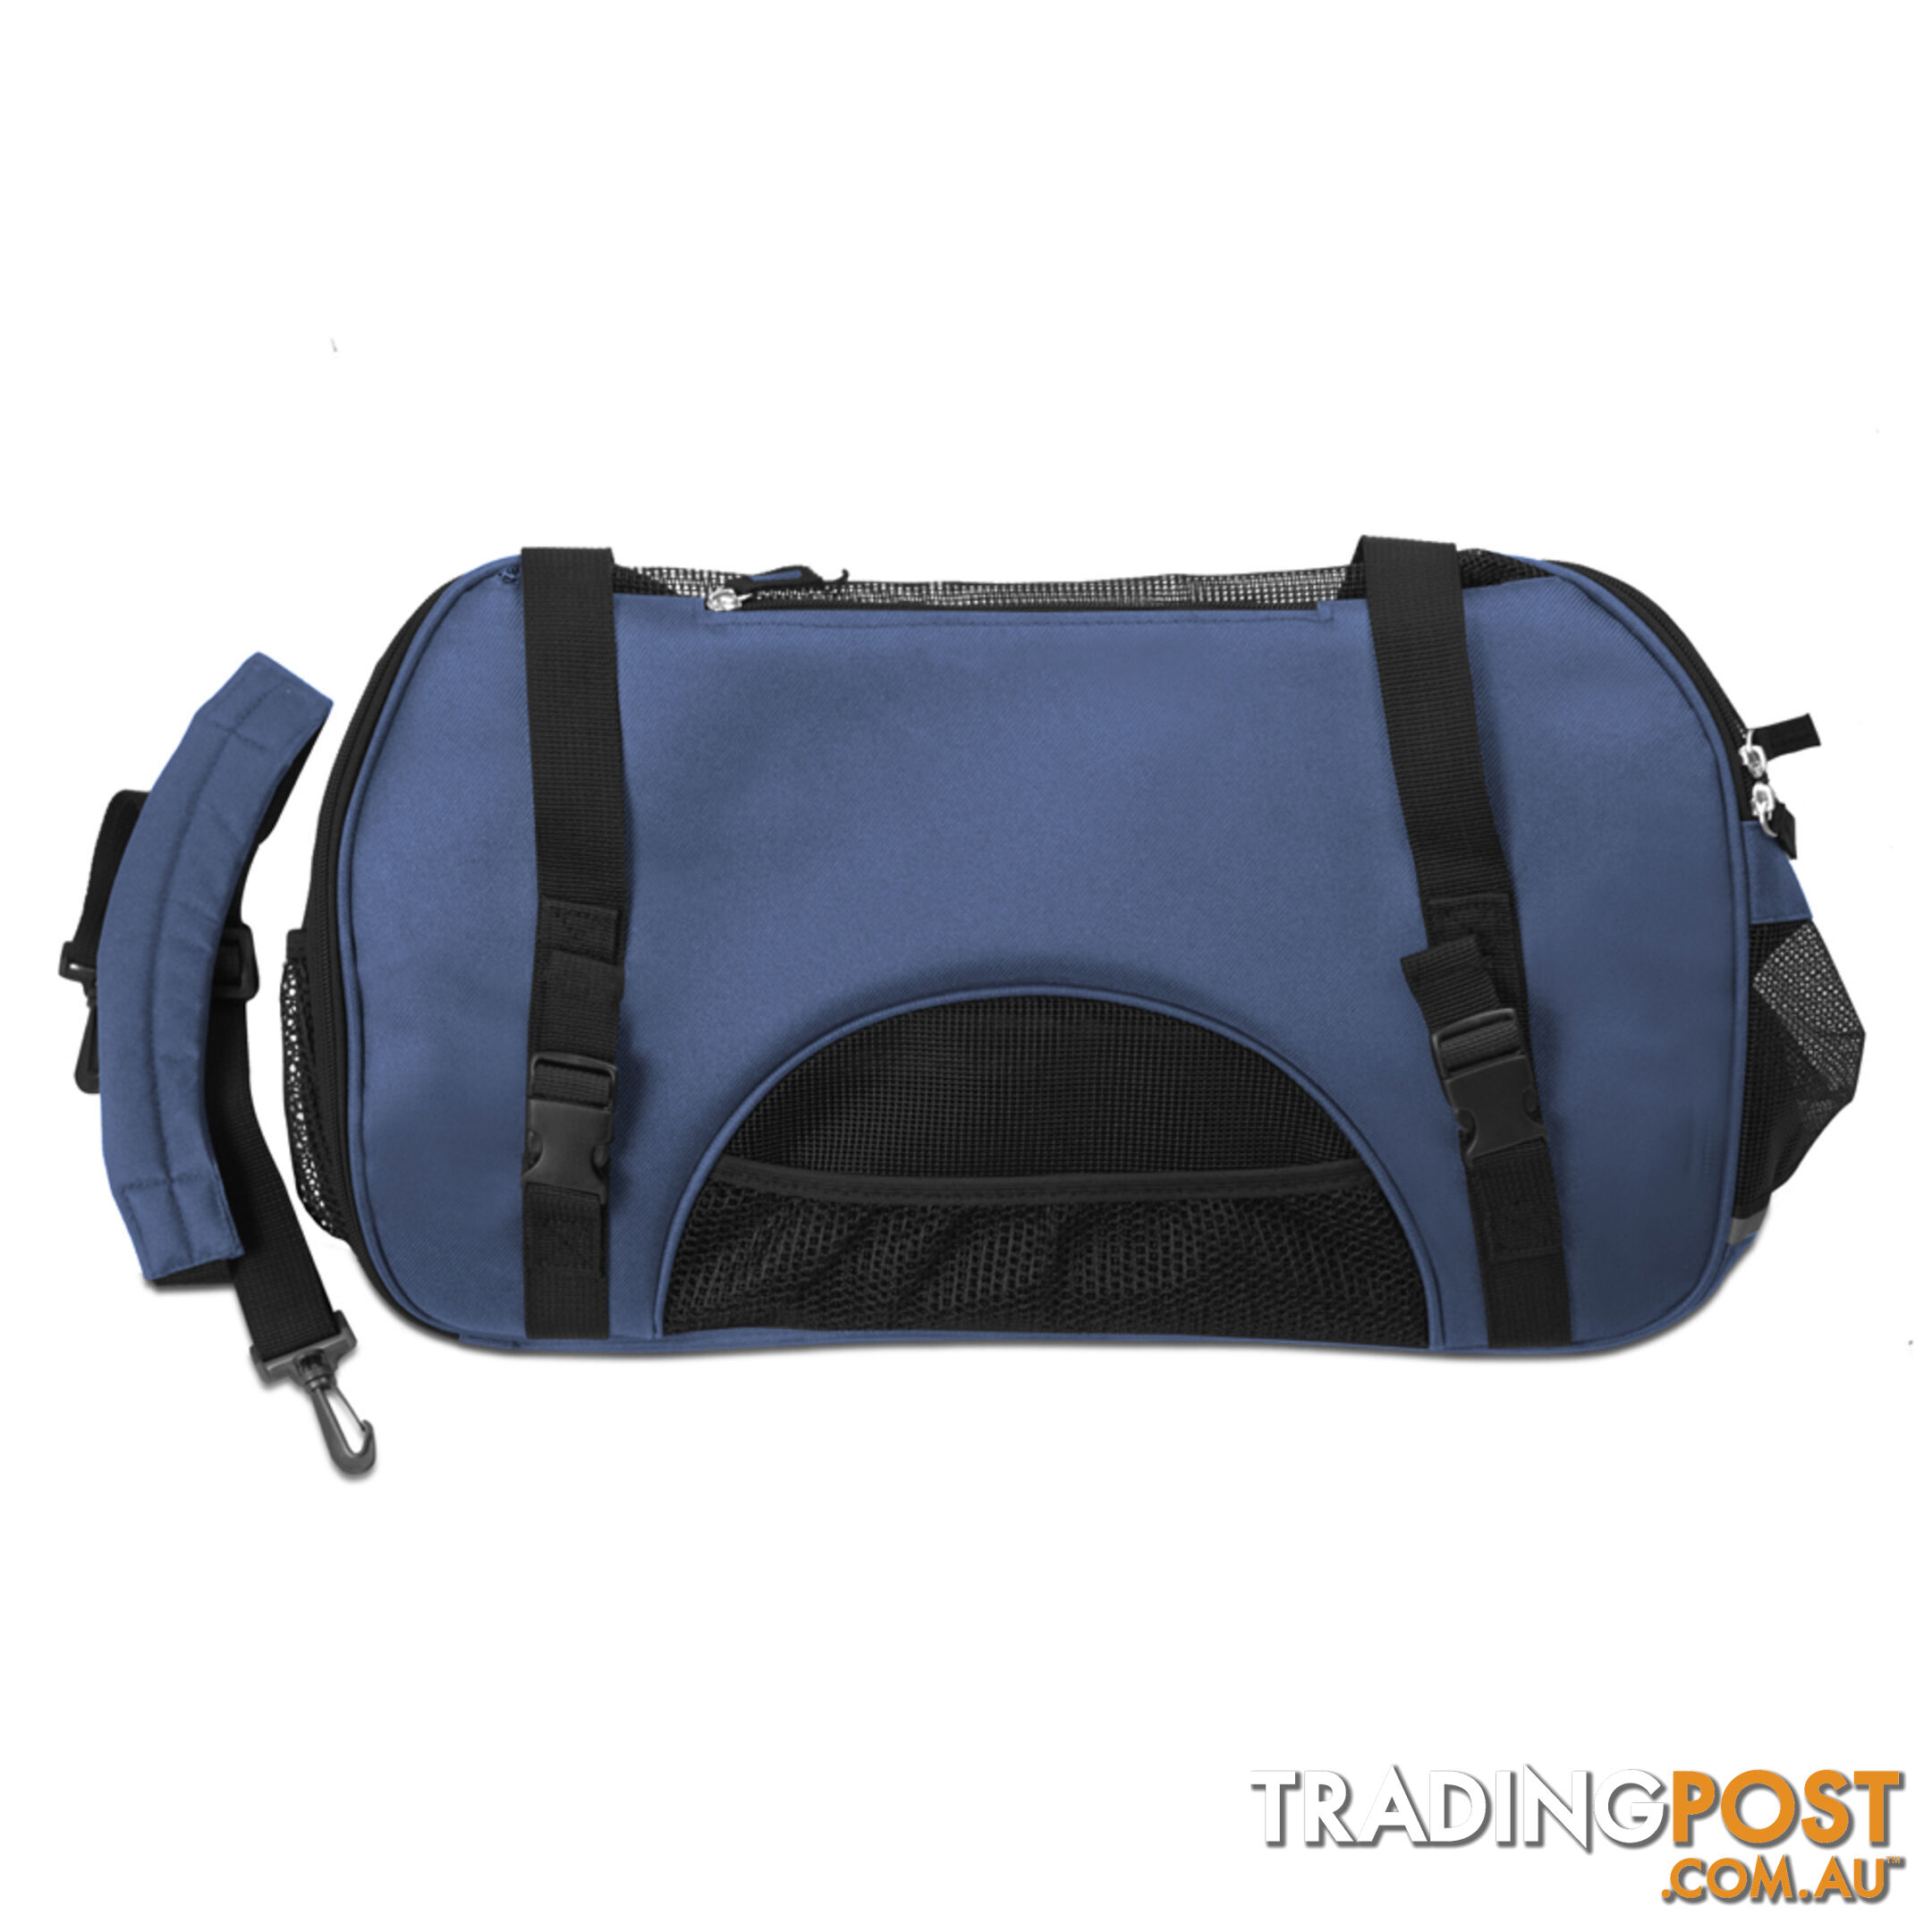 Portable Pet Carrier with Safety Leash - Blue